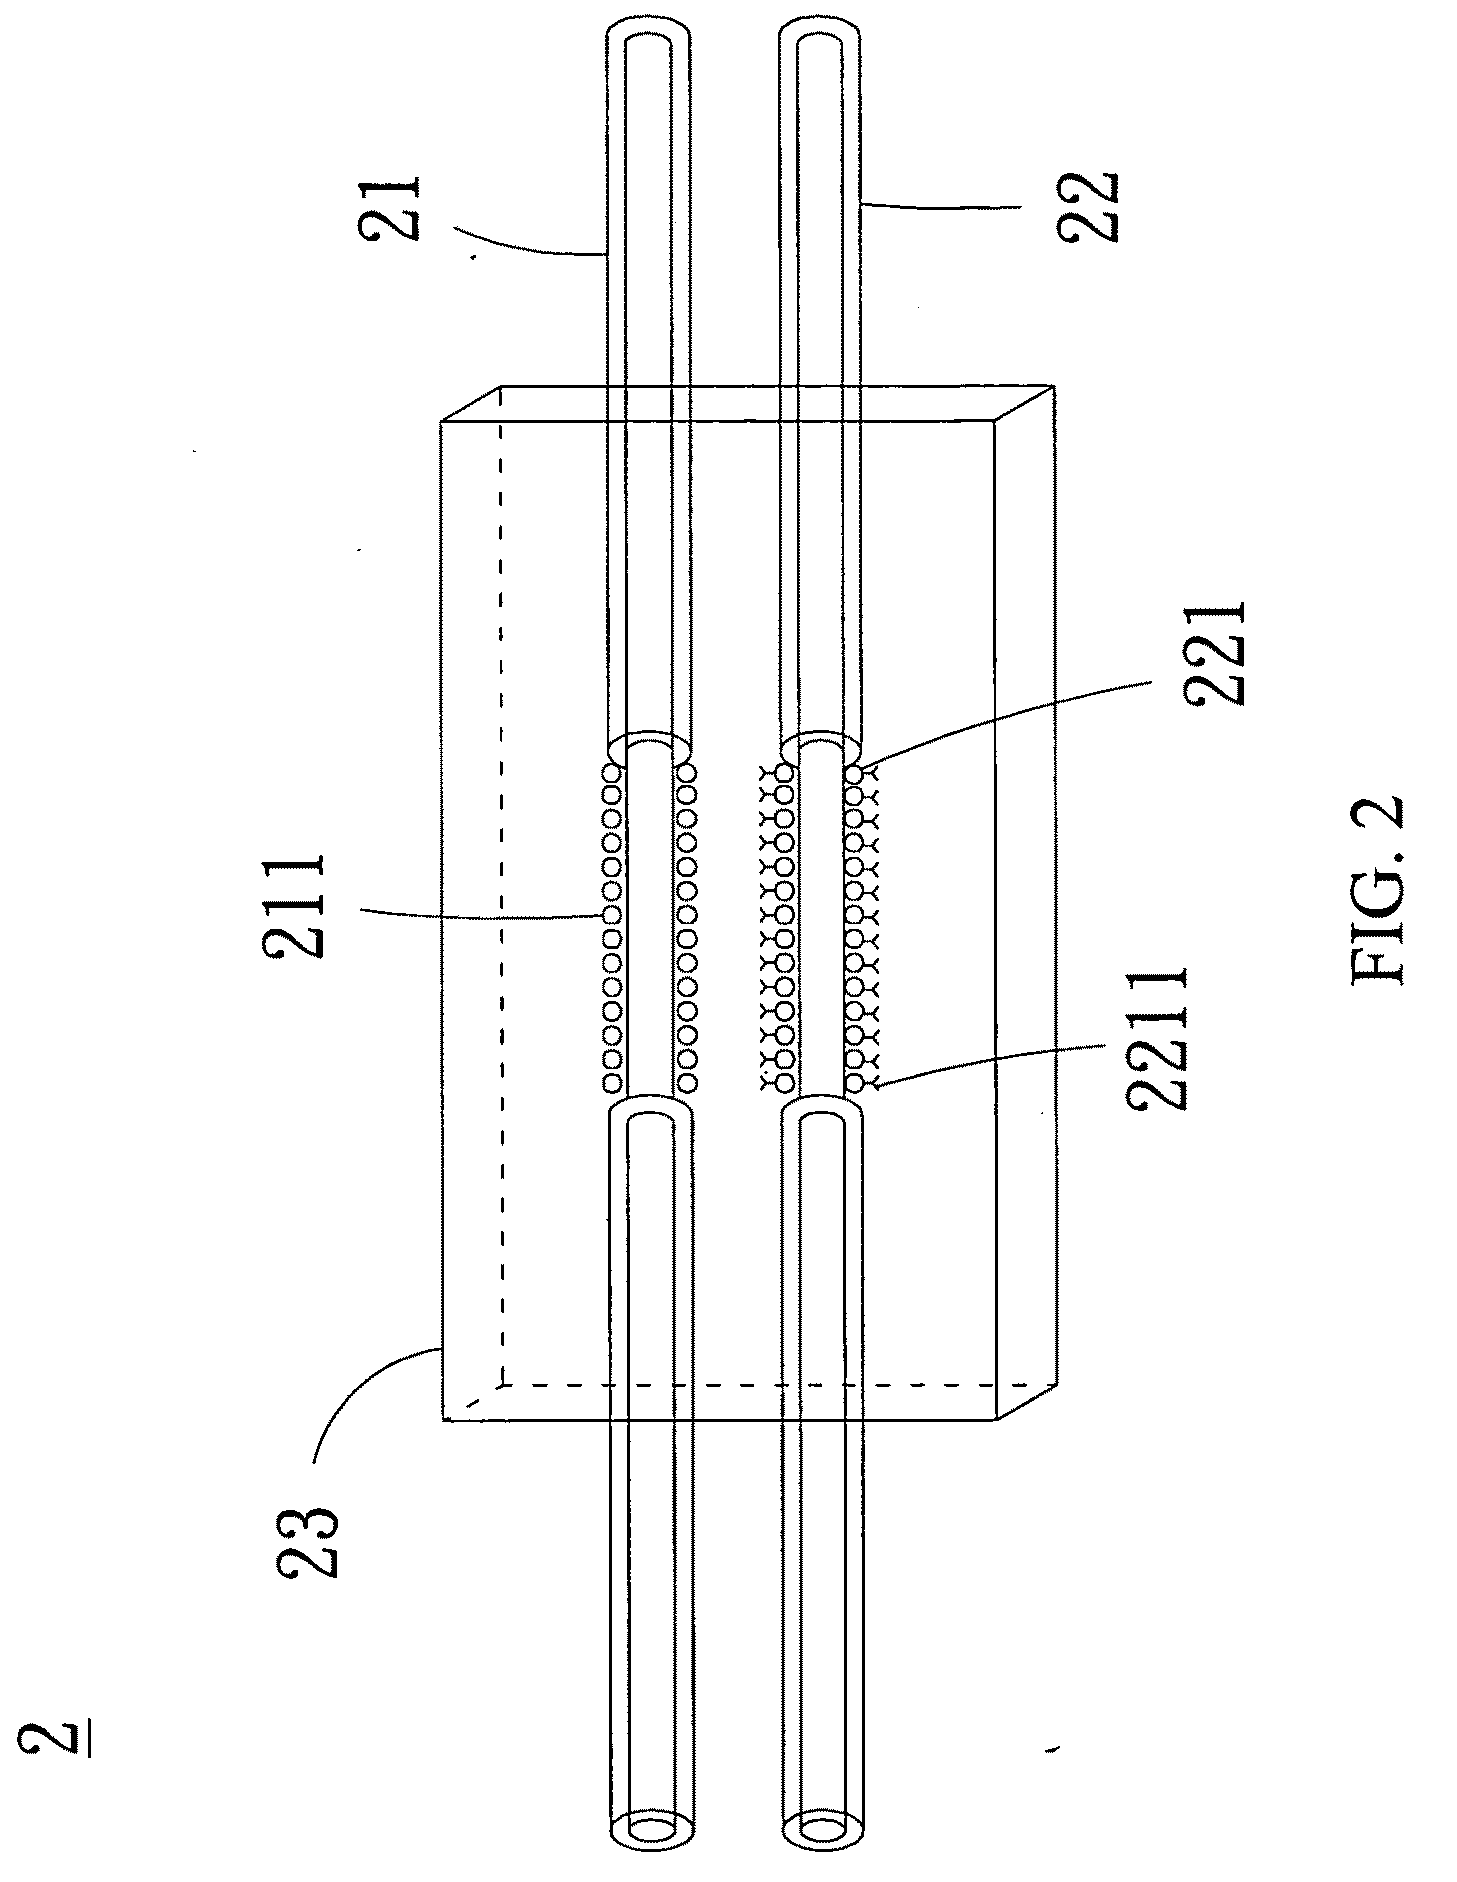 Self-referencing fiber-optic localized plasmon resonance sensing device and system thereof